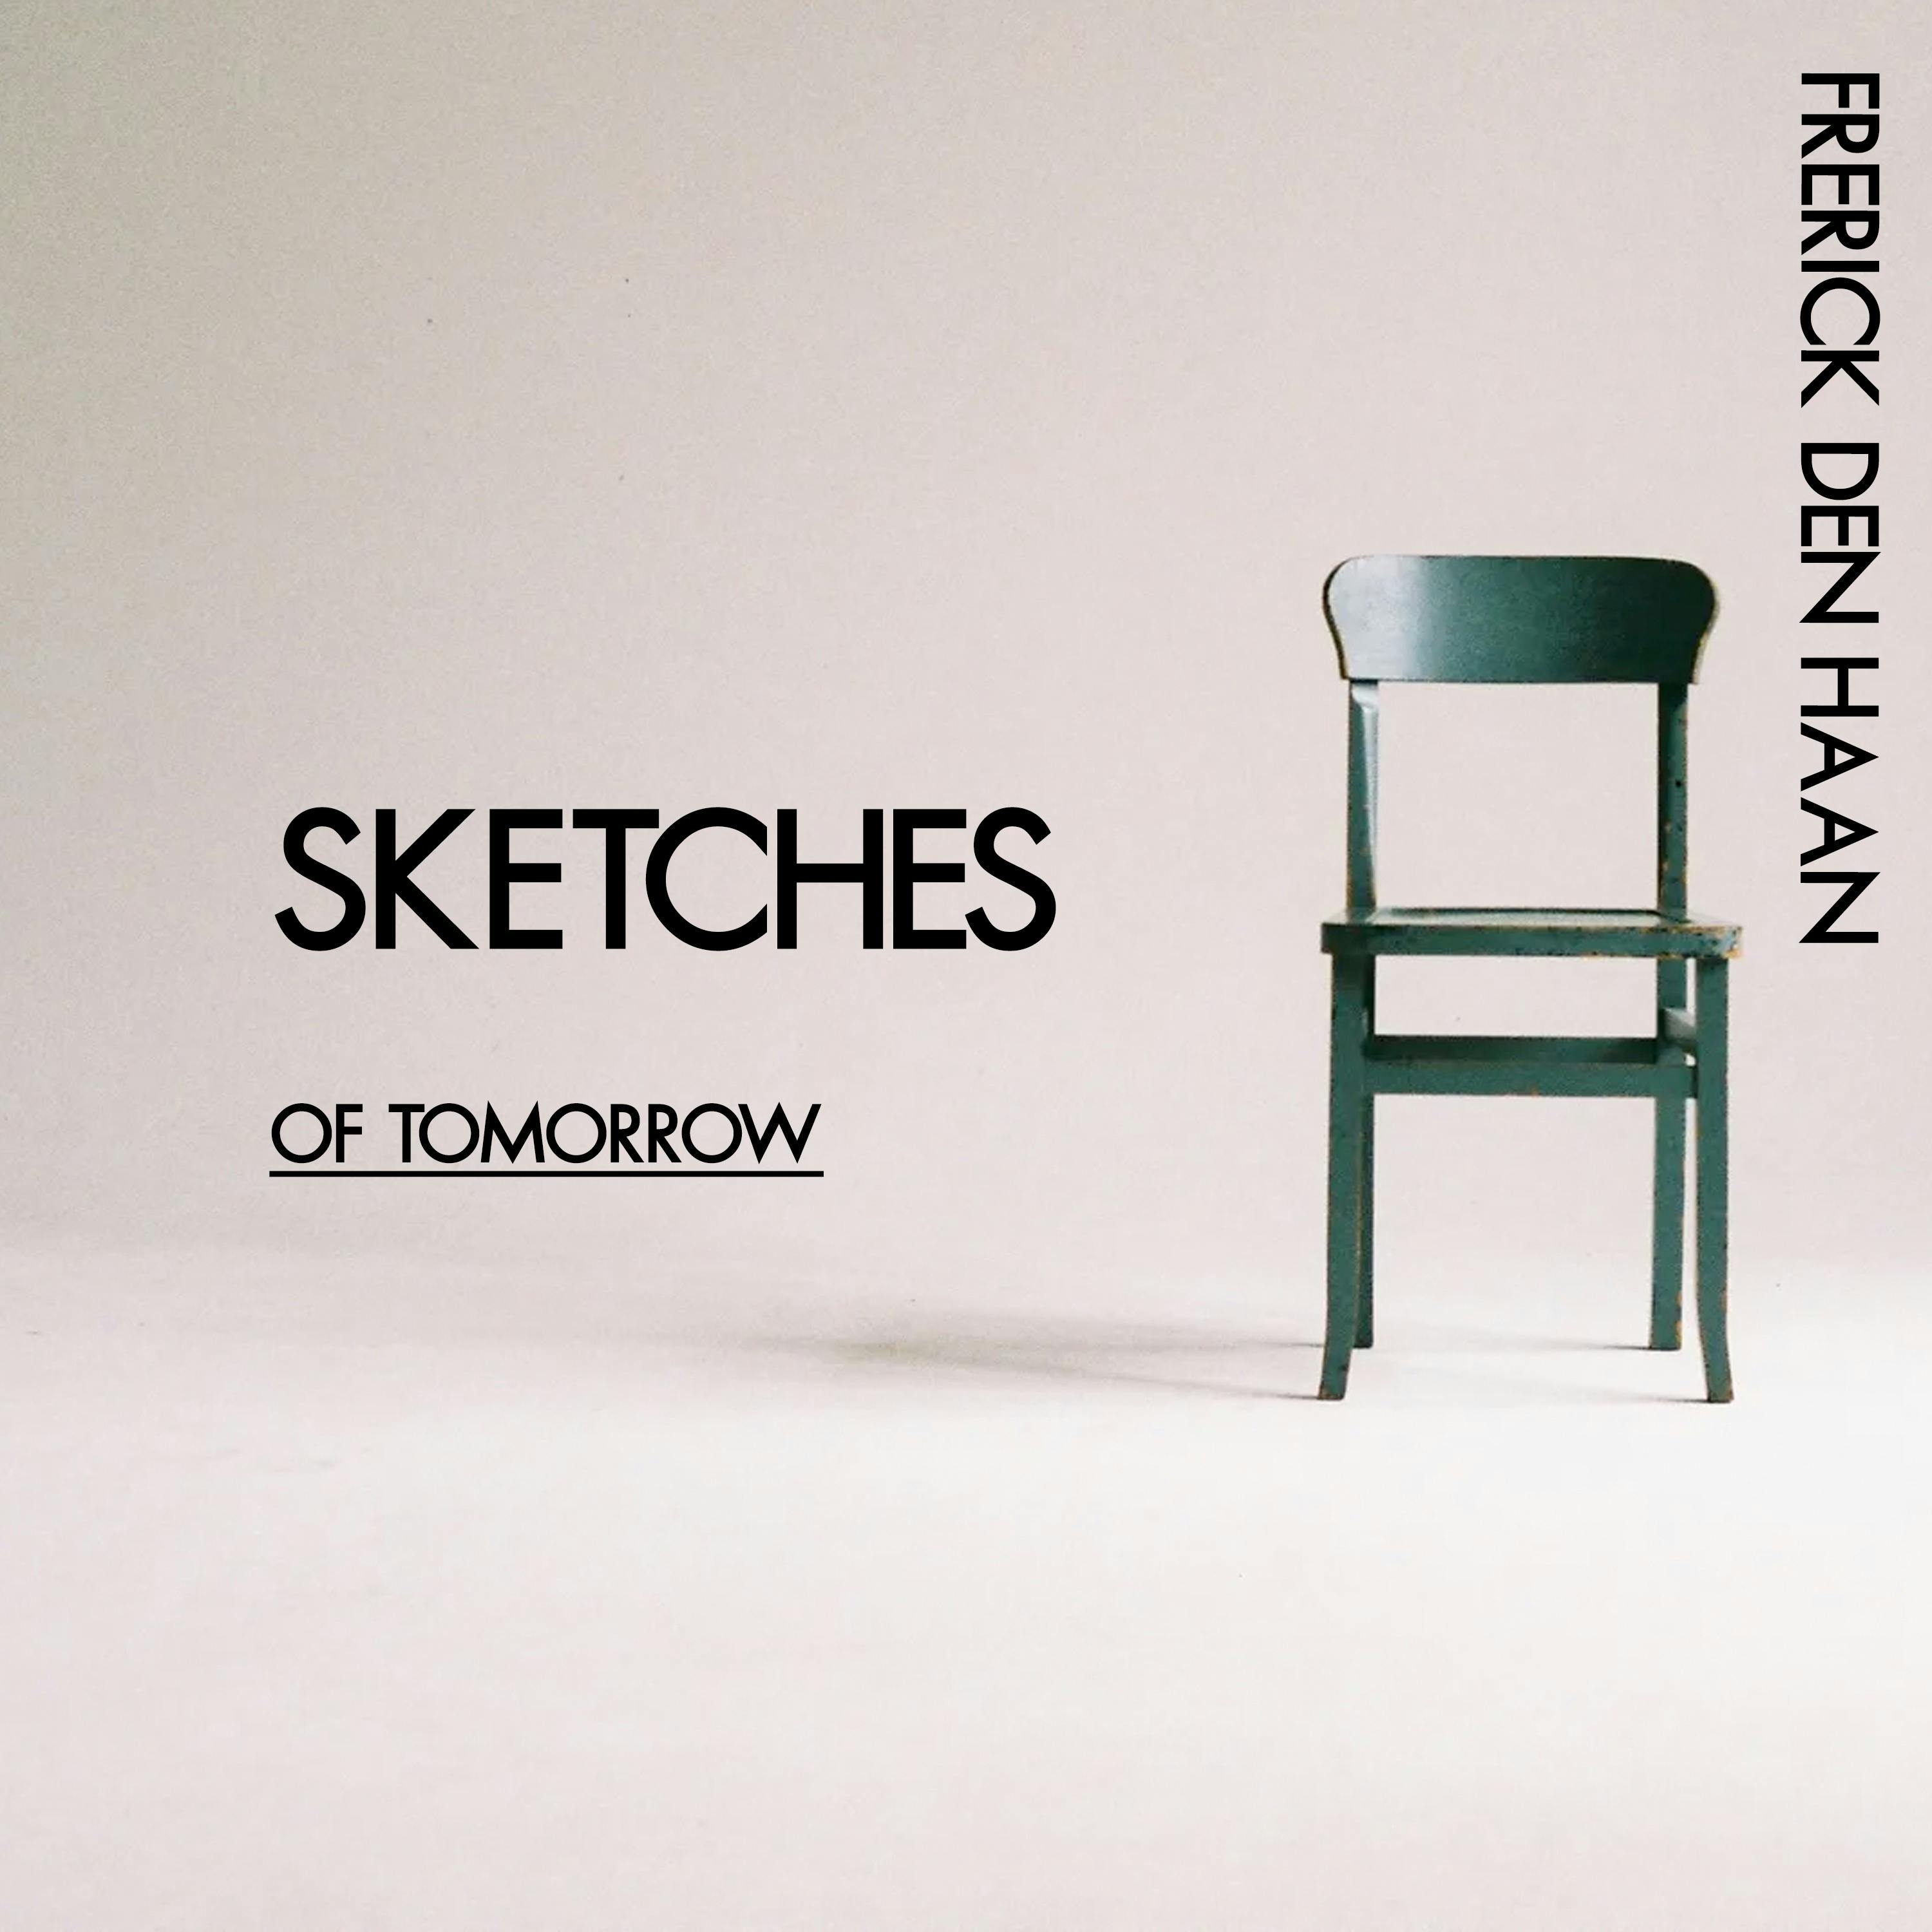 Sketches of Tomorrow